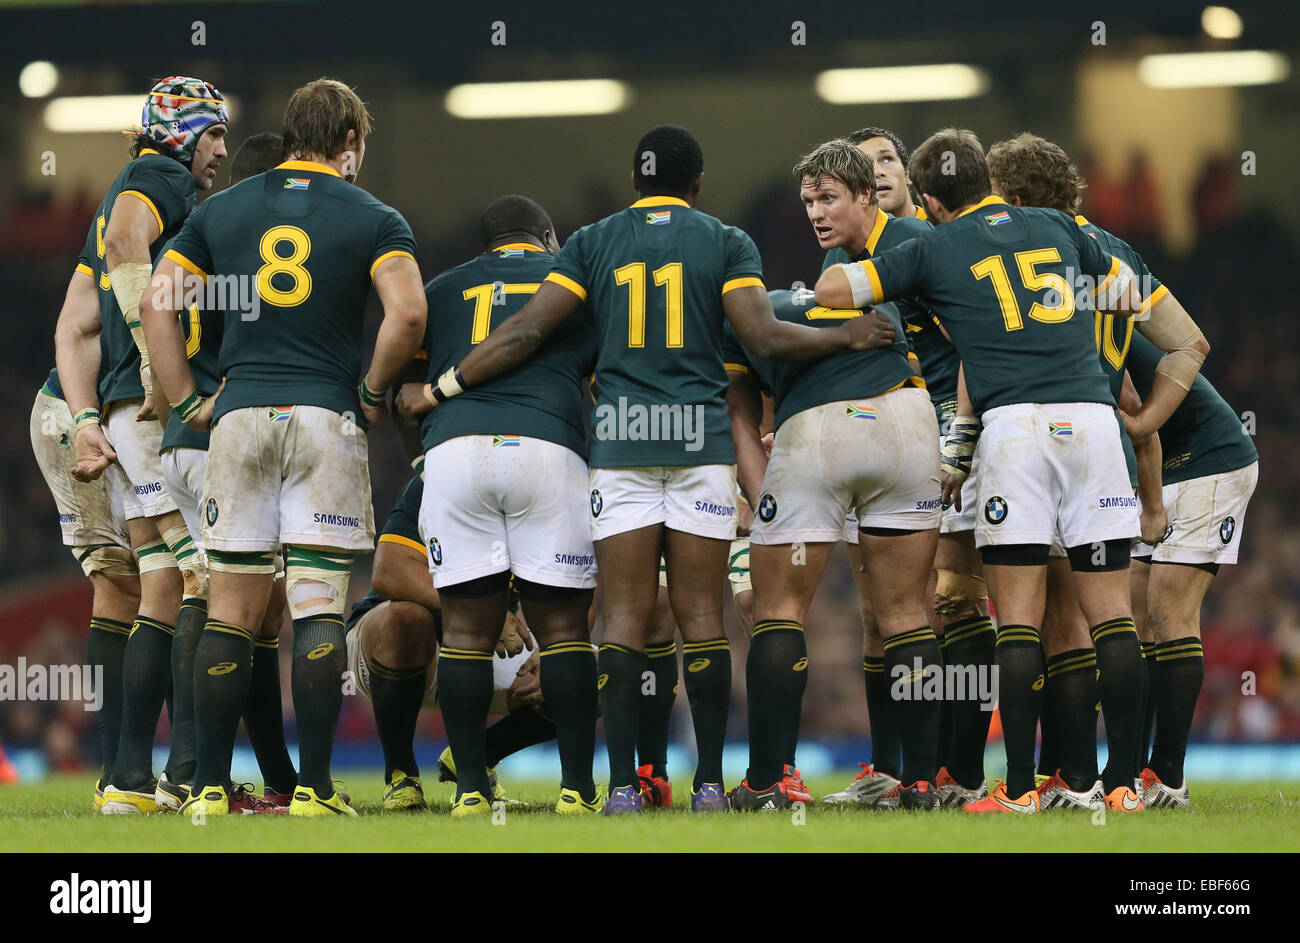 Cardiff, UK. 29th Nov, 2014. Jean De Villiers of South Africa rallies his players as they conceded a penalty - Autumn Internationals - Wales vs South Africa - Millennium Stadium - Cardiff - Wales - 29th November 2014 - Picture Simon Bellis/Sportimage. Credit:  csm/Alamy Live News Stock Photo